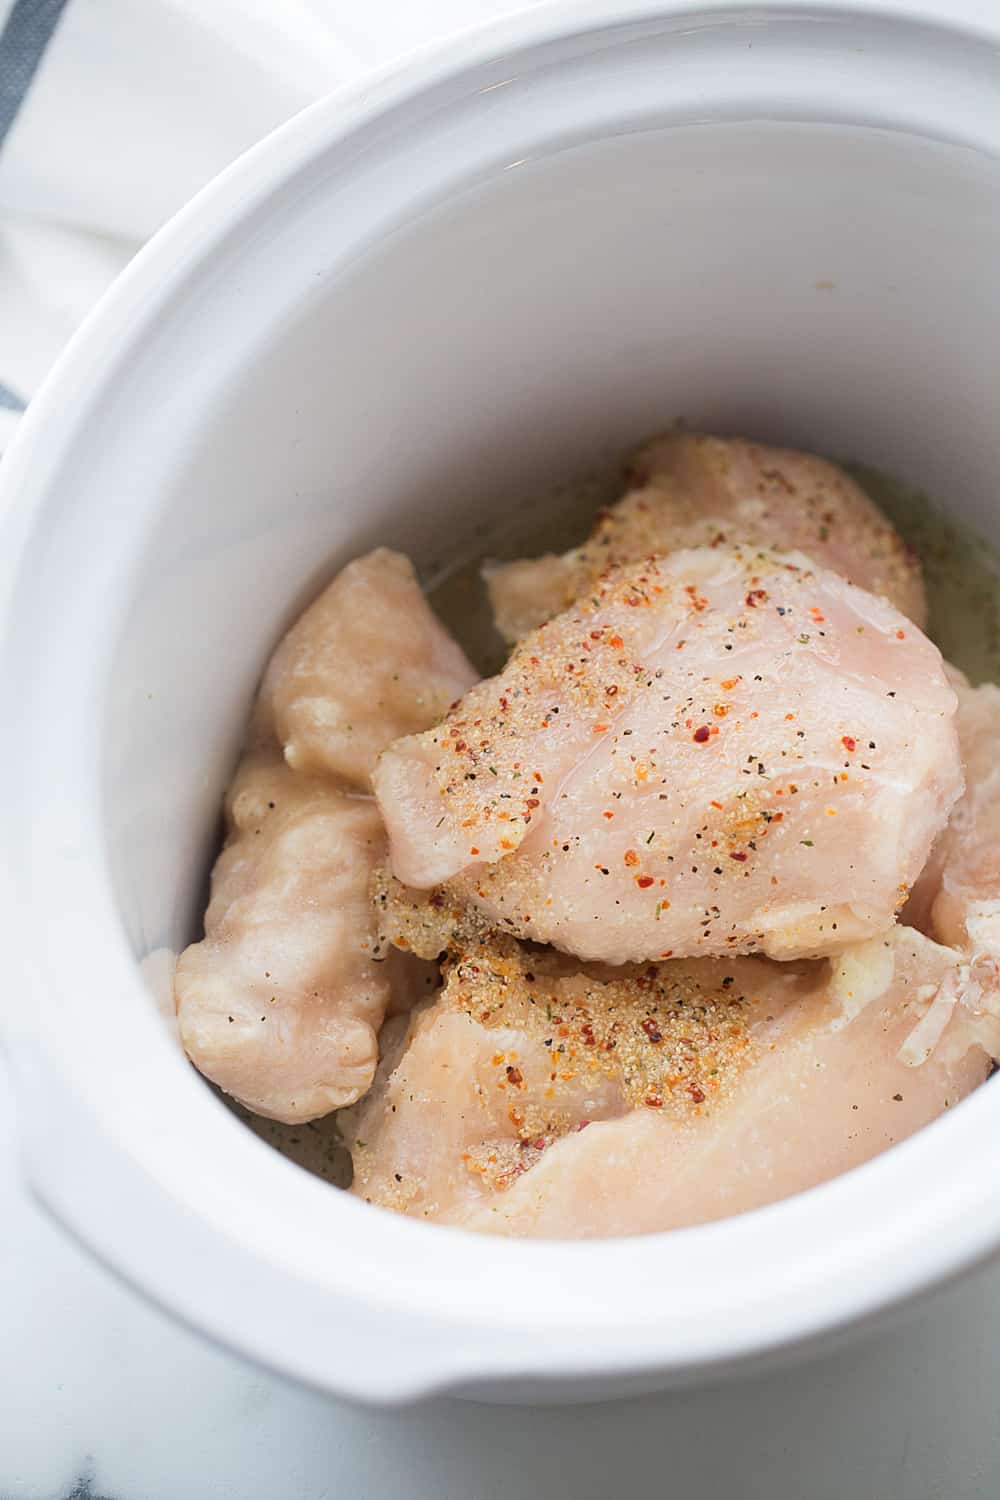 Slow Cooker Creamy Italian Chicken - Slow cooker creamy Italian chicken is easy, creamy, and comforting. You and your family will love this simple weeknight meal! #slowcooker #crockpot #chicken #recipe #chickenrecipe #halfscratched #italianchicken #cooking #easyrecipe